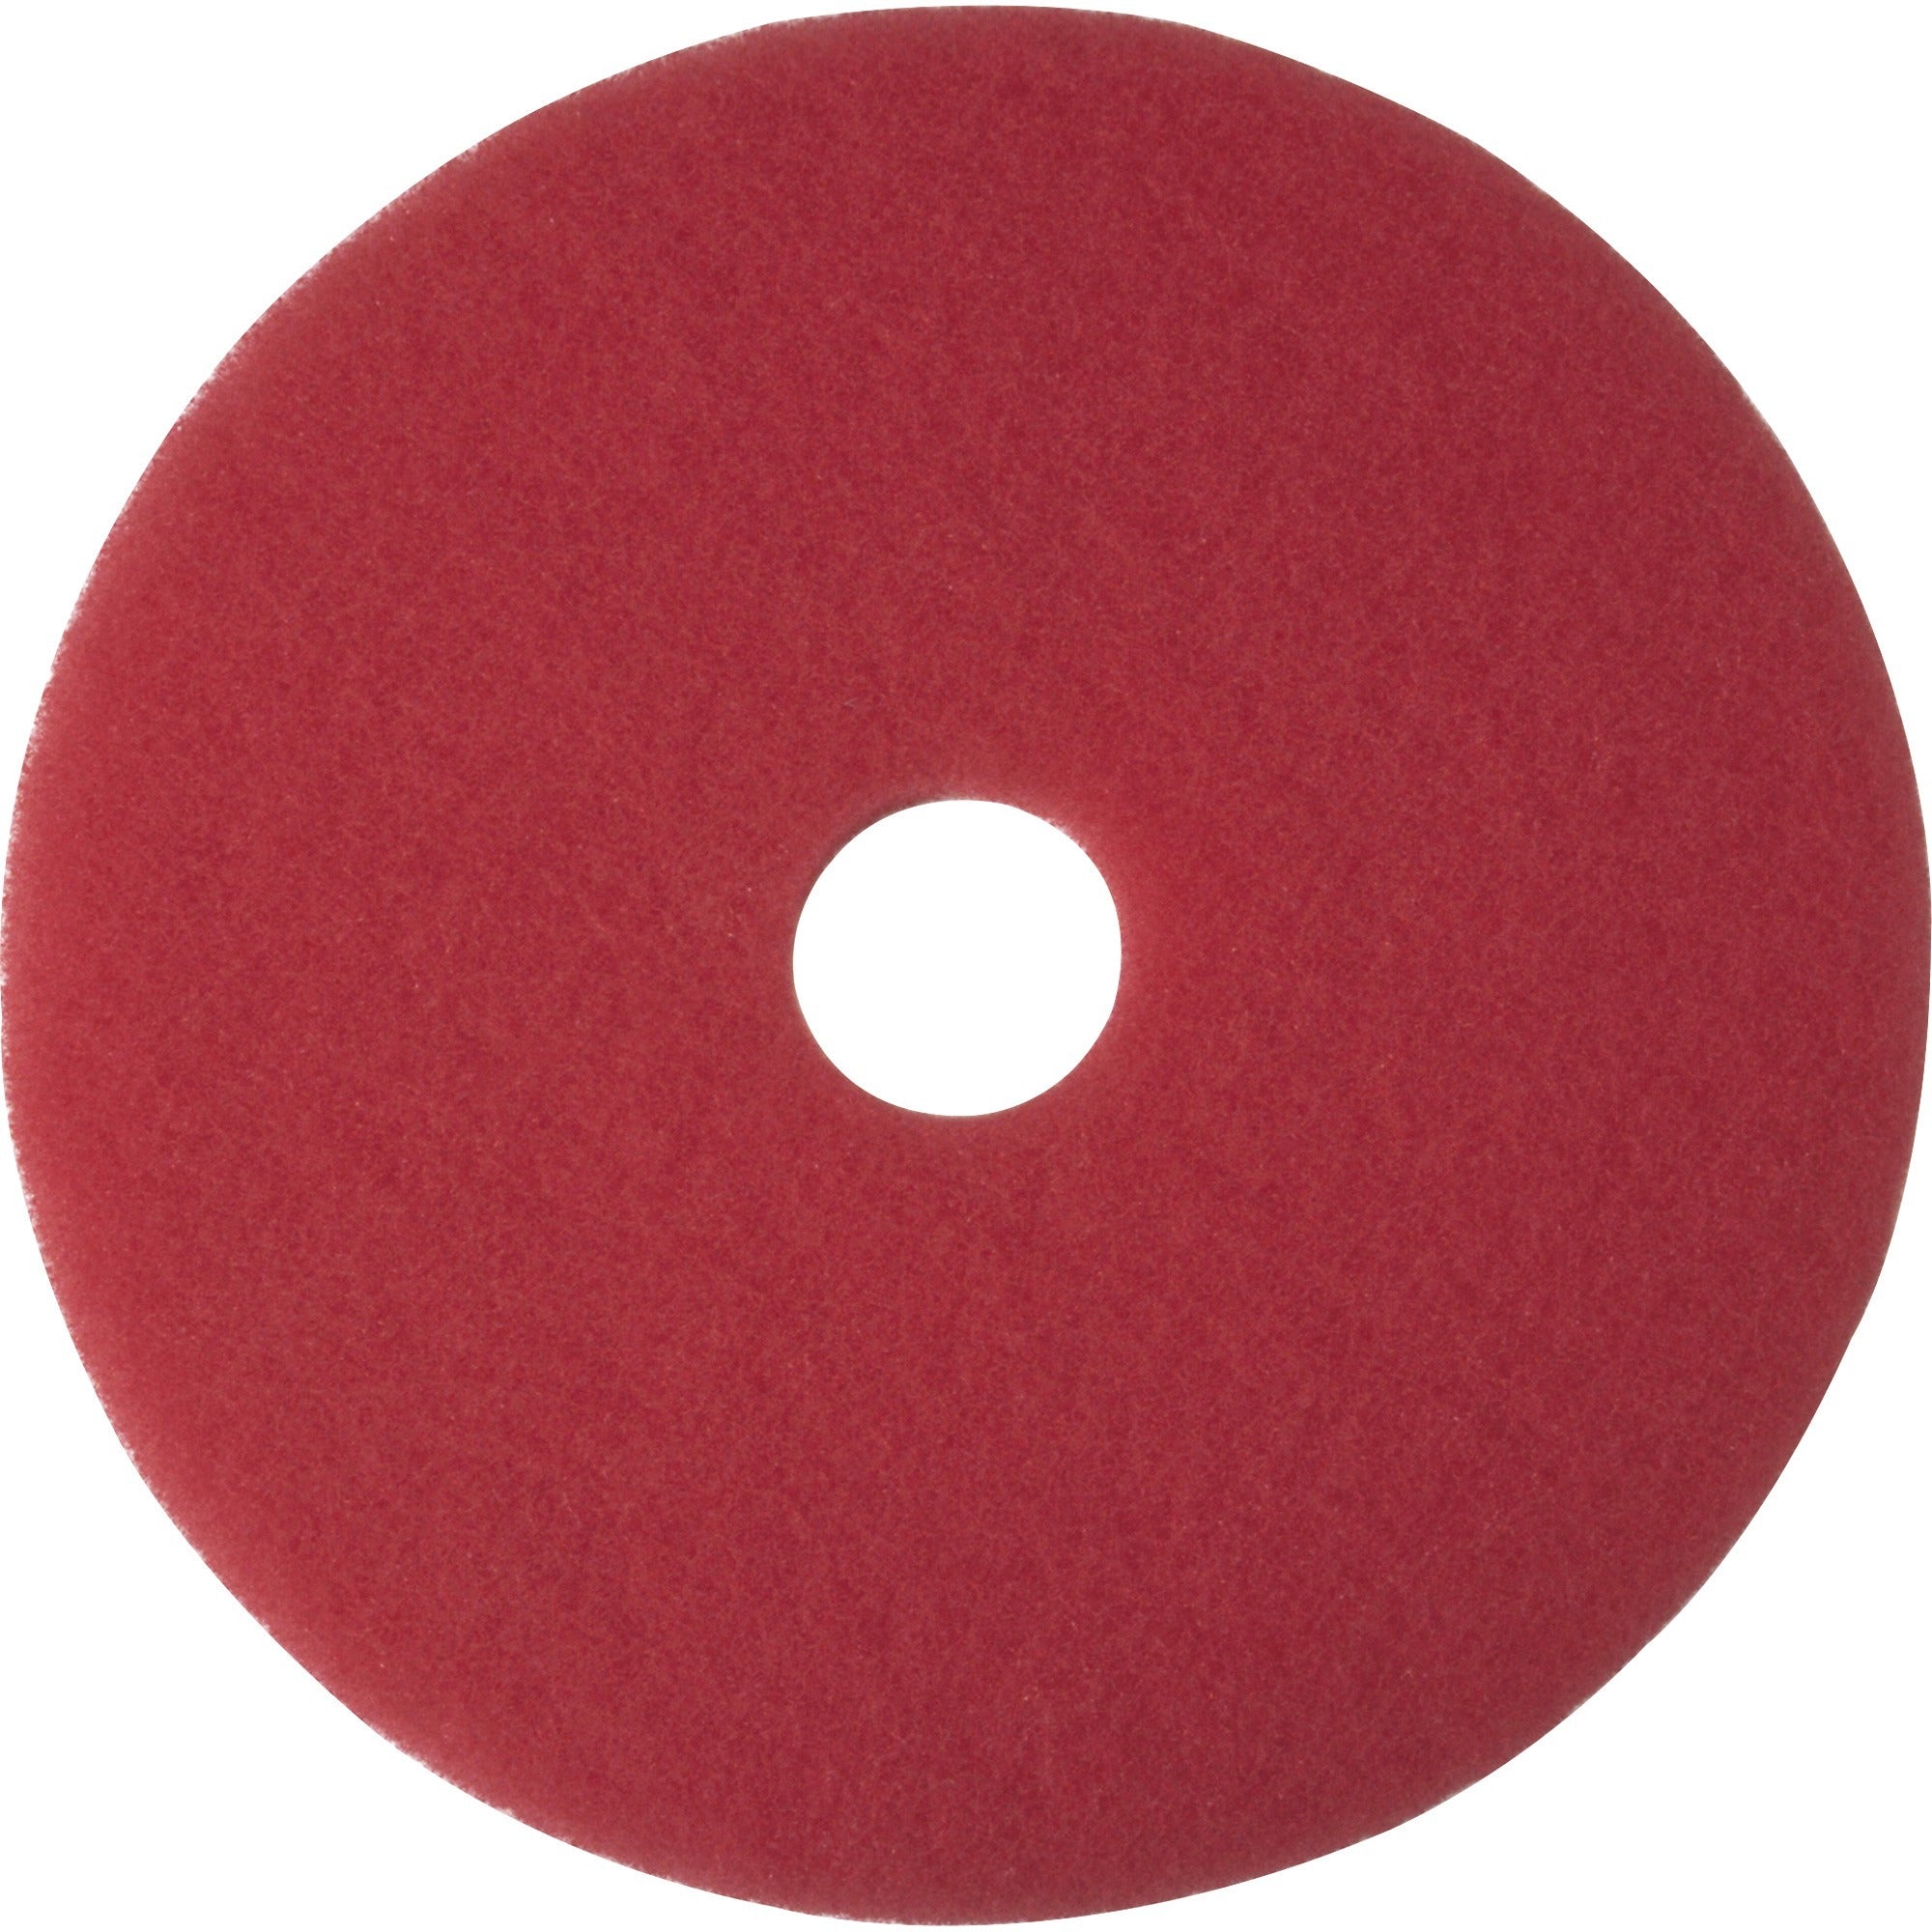 3m-niagara-cleaning-pad-5-carton-round-x-14-diameter-buffing-floor-marble-floor-175-rpm-to-600-rpm-speed-supported-scuff-mark-remover-polyester-red_mmm5100n14 - 1